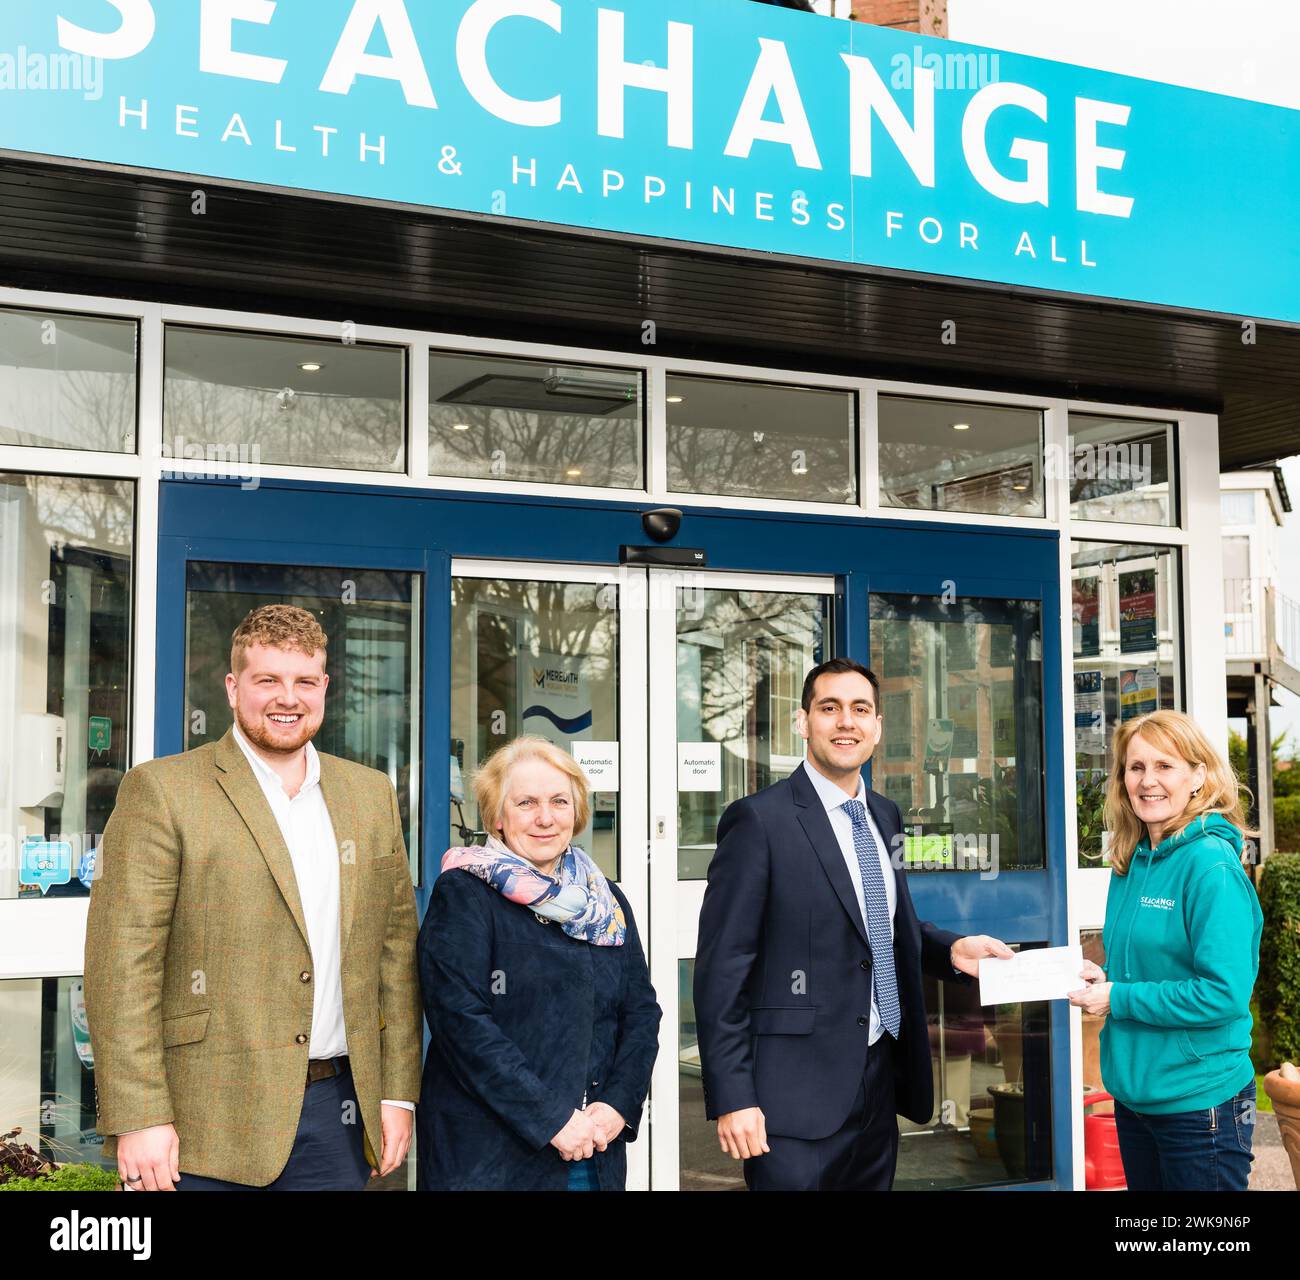 David Reed, a prospective MP, presenting a chegue to the Seachange charity of Budleigh.Salterton. Stock Photo